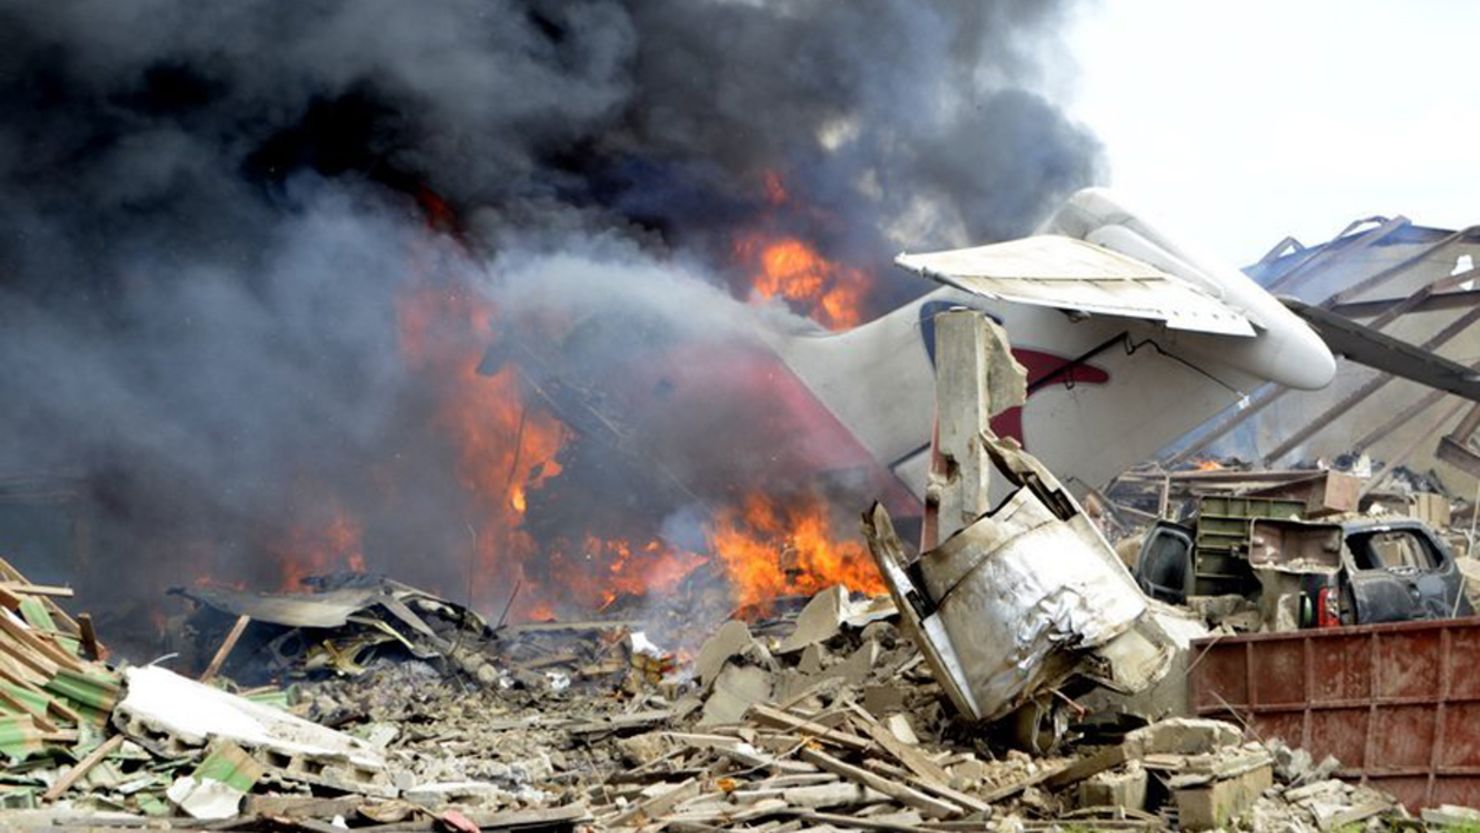 A deadly airline crash in Nigeria raises questions about how airline safety is tracked.